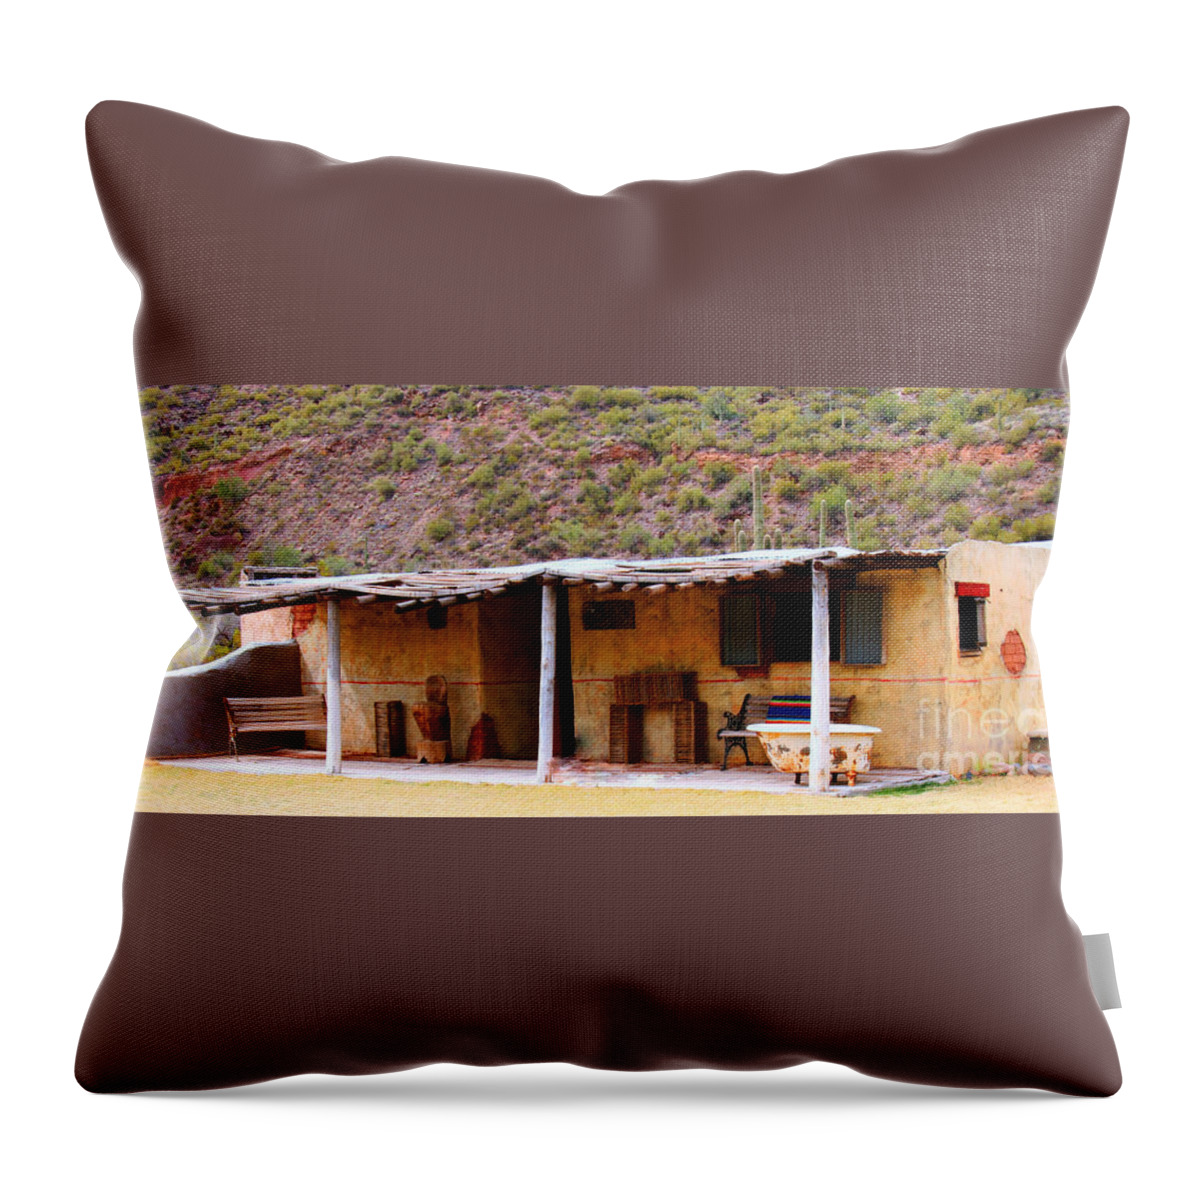 Arizona Throw Pillow featuring the photograph Southwest Canyon Hacienda by Tap On Photo